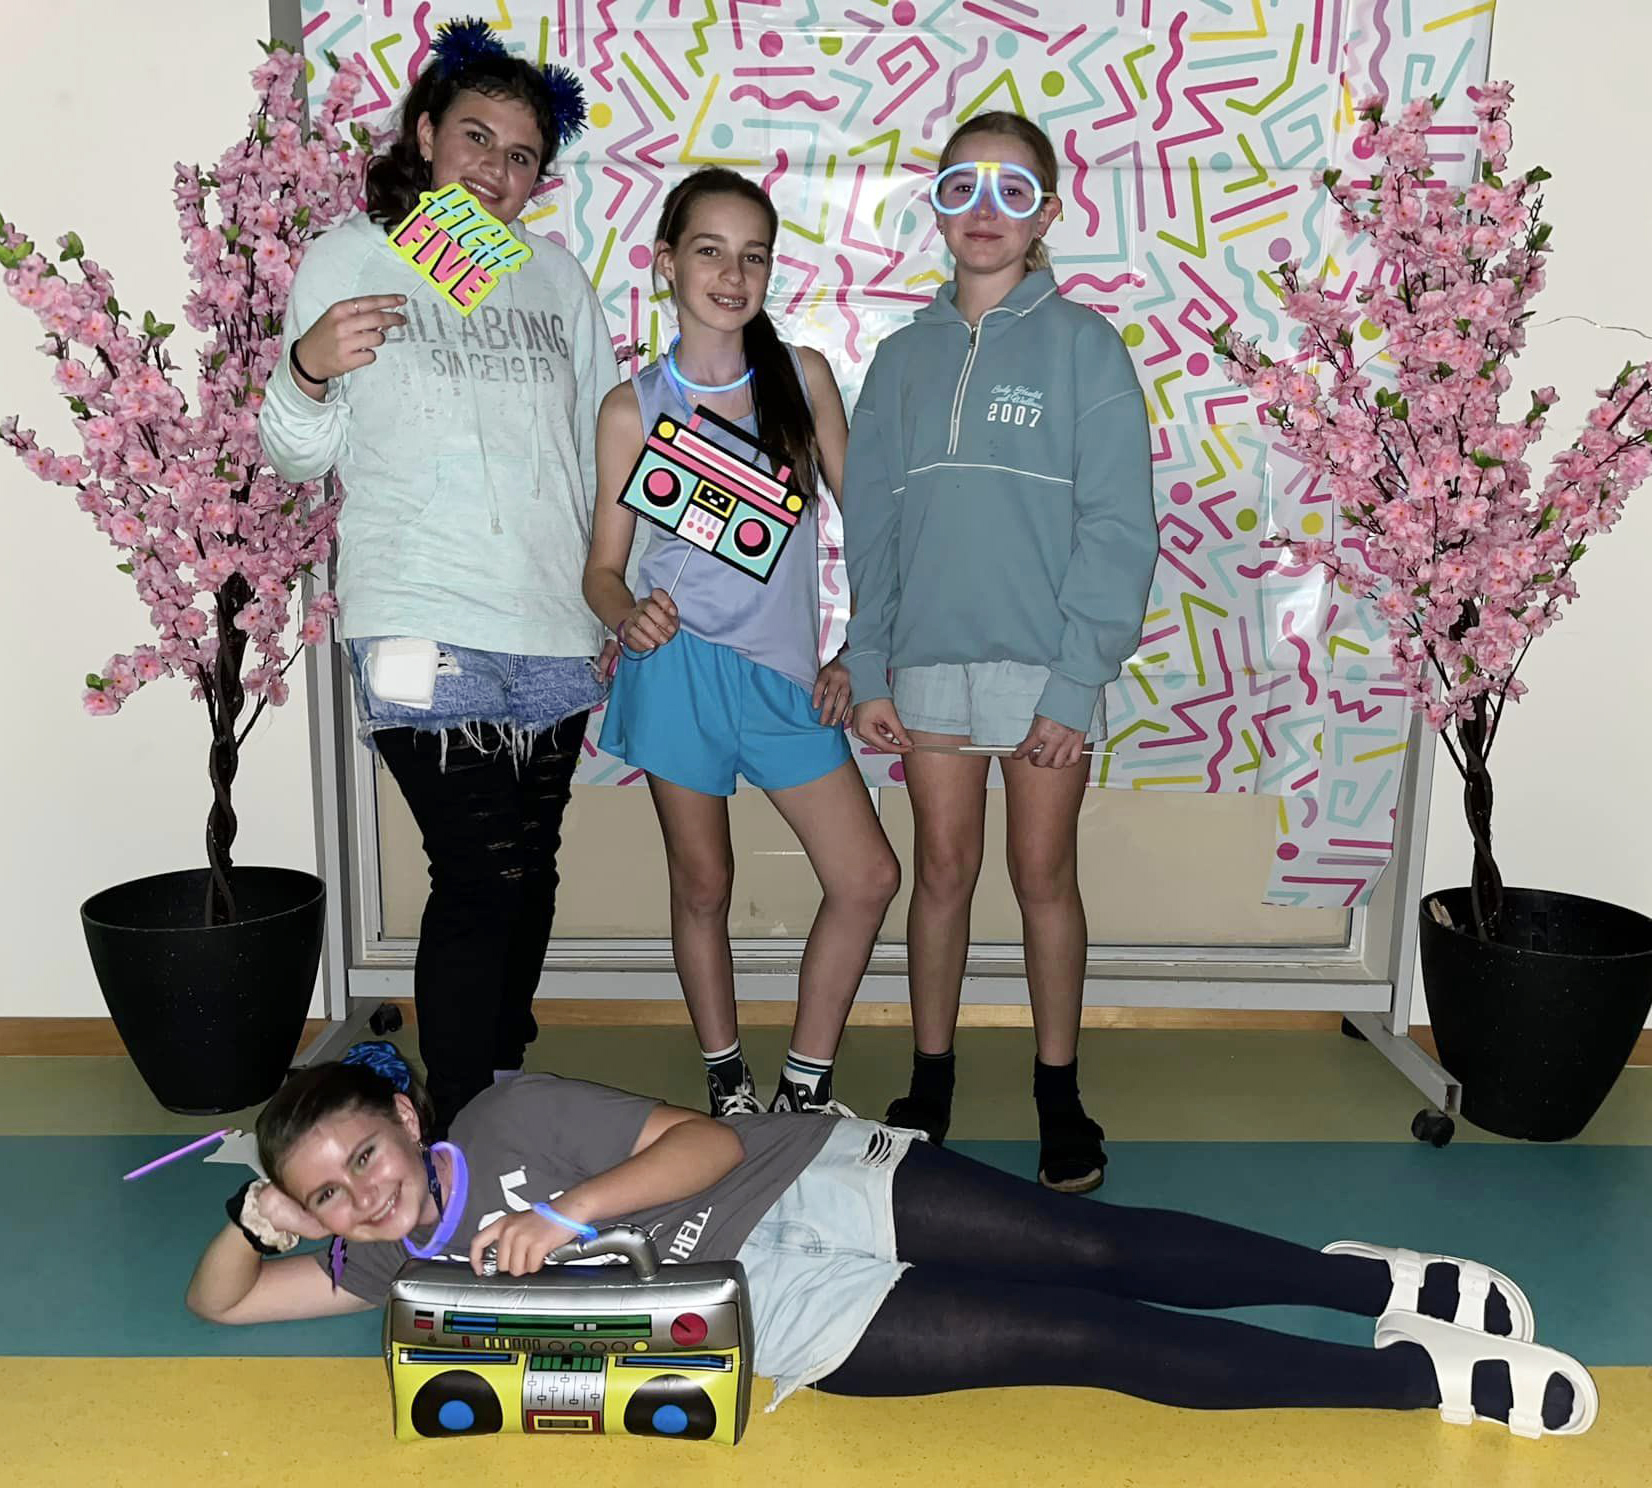 Geraldton Residential College boarders celebrating an 80s-themed dinner